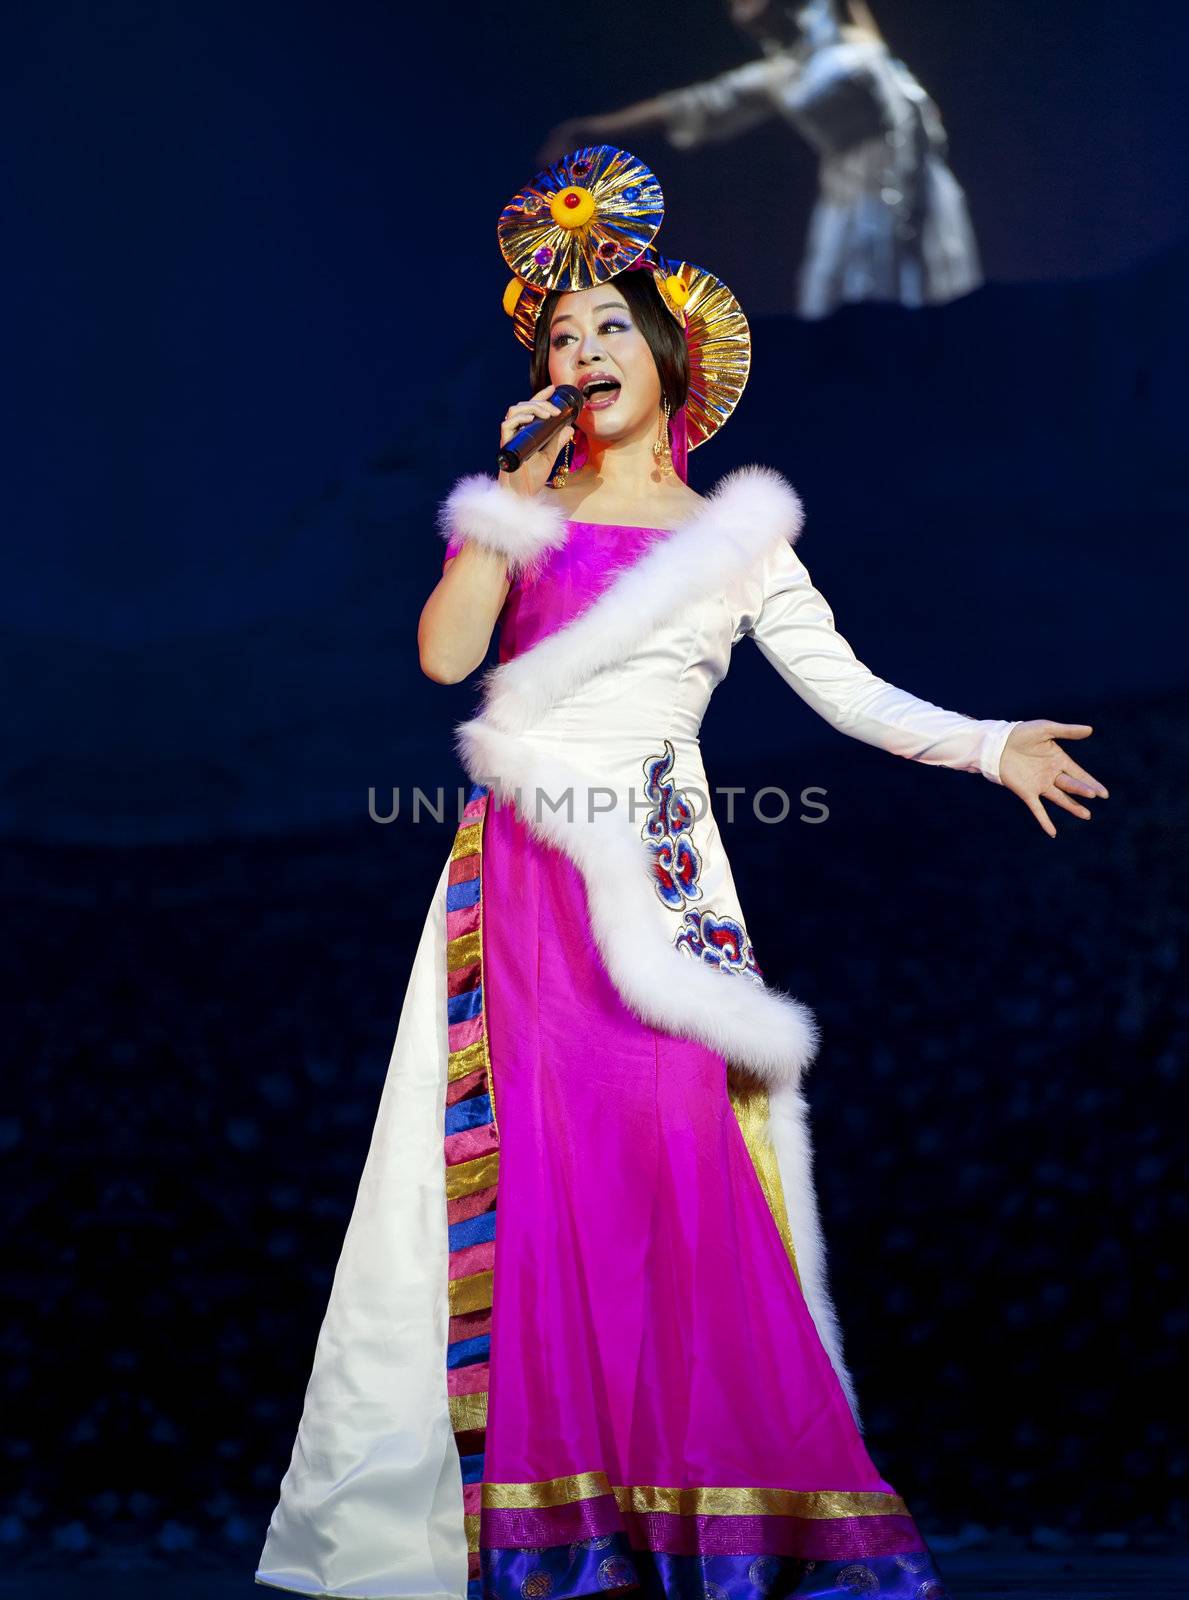 CHENGDU - OCT 17: Tibetan national singer performs folk song on stage at JINCHENG theater on Oct 17, 2011 in Chengdu, China.